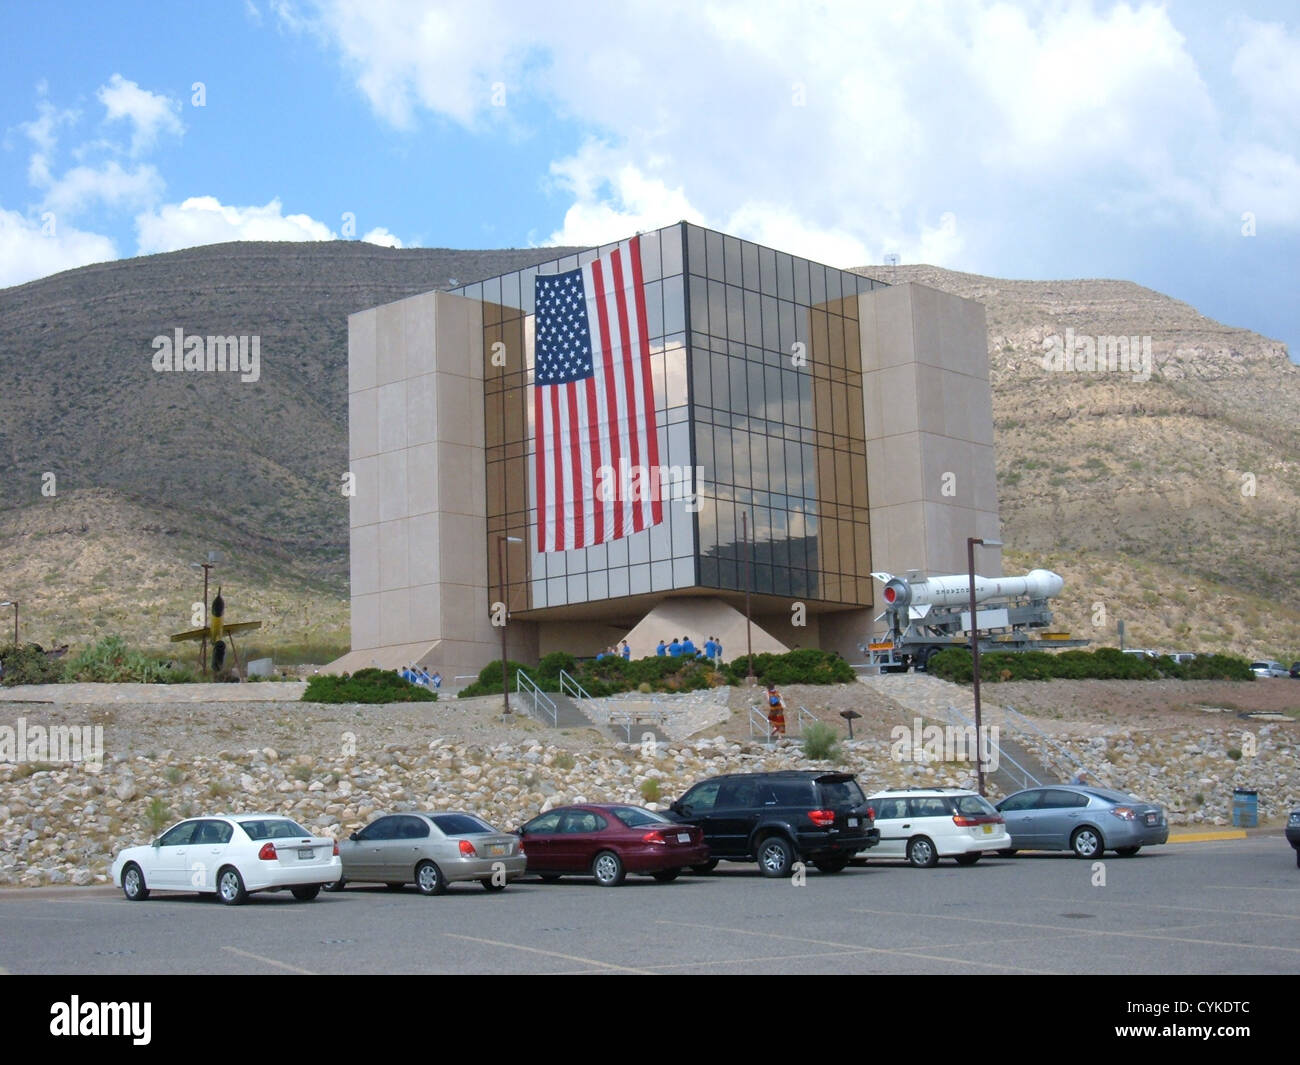 New Mexico Museum of Space History, Alamogordo, New Mexico. The giant US flag is hung from the museum every year on July 4. Stock Photo